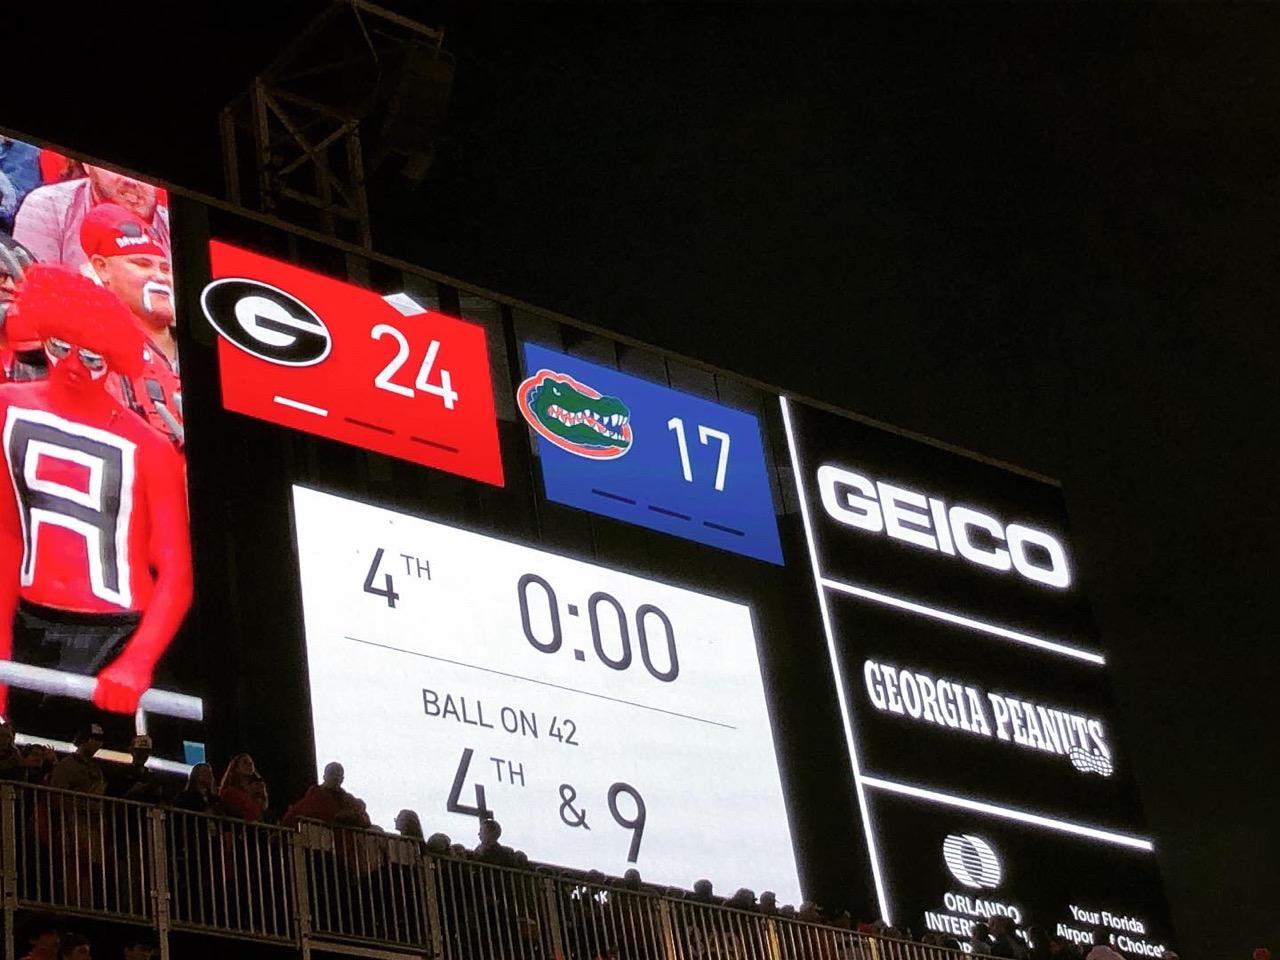 Georgia on top of Florida 24-17, Photo by Lance McCurley